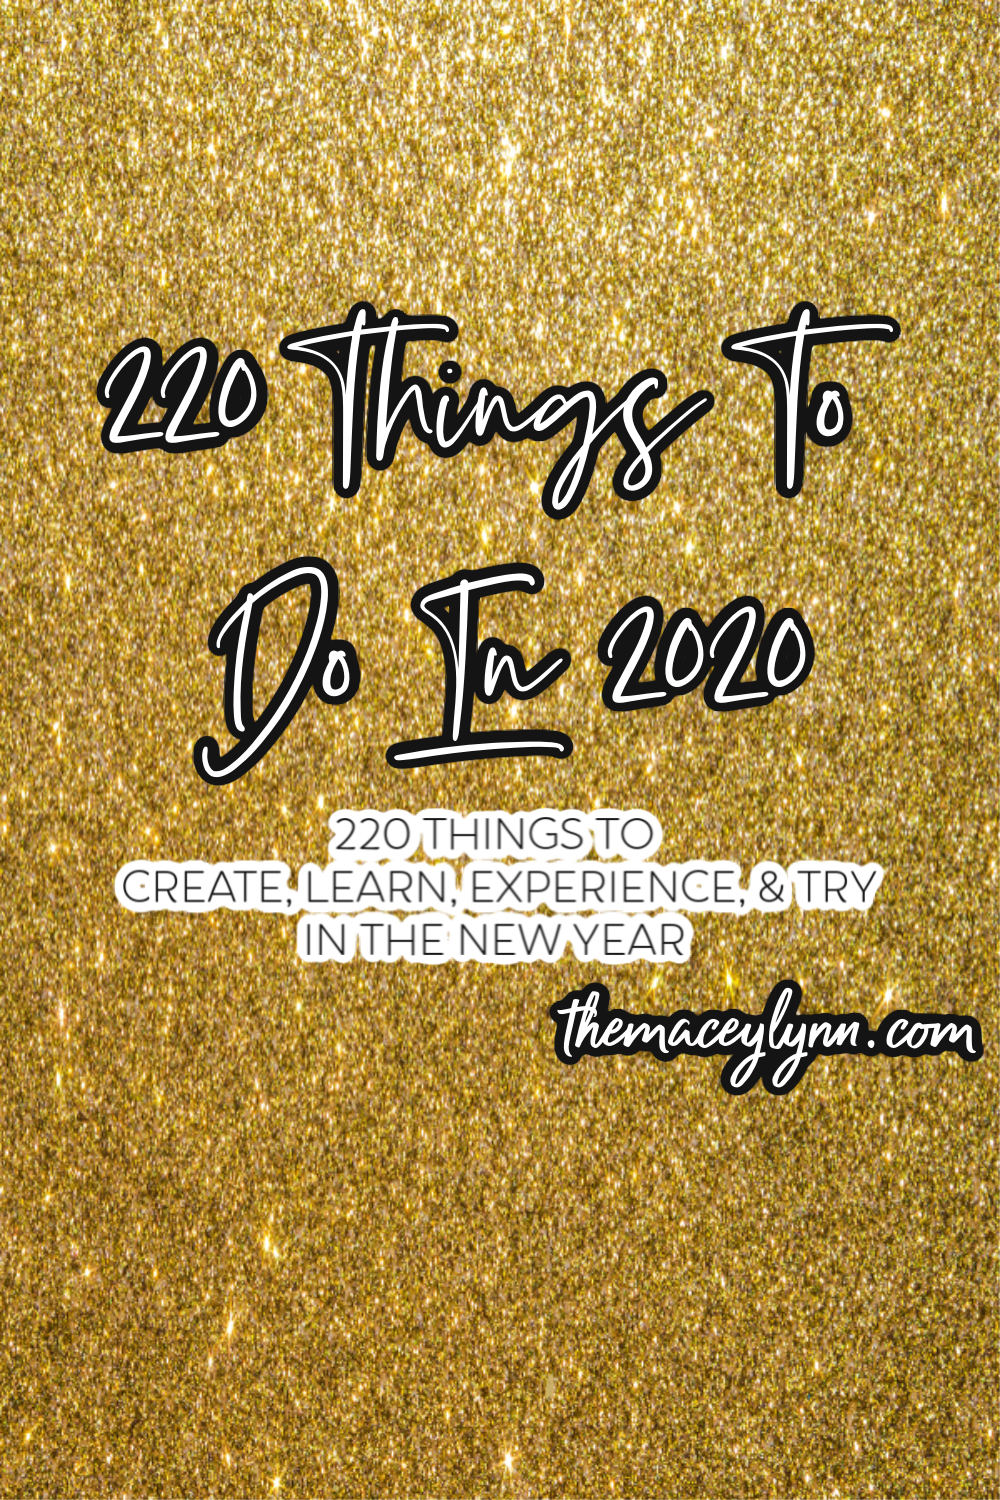 2020 New Years Resolutions and Things To Do in 2020... a list of 220 things to try, create, learn, and experience. Add new ideas to your bucket list!